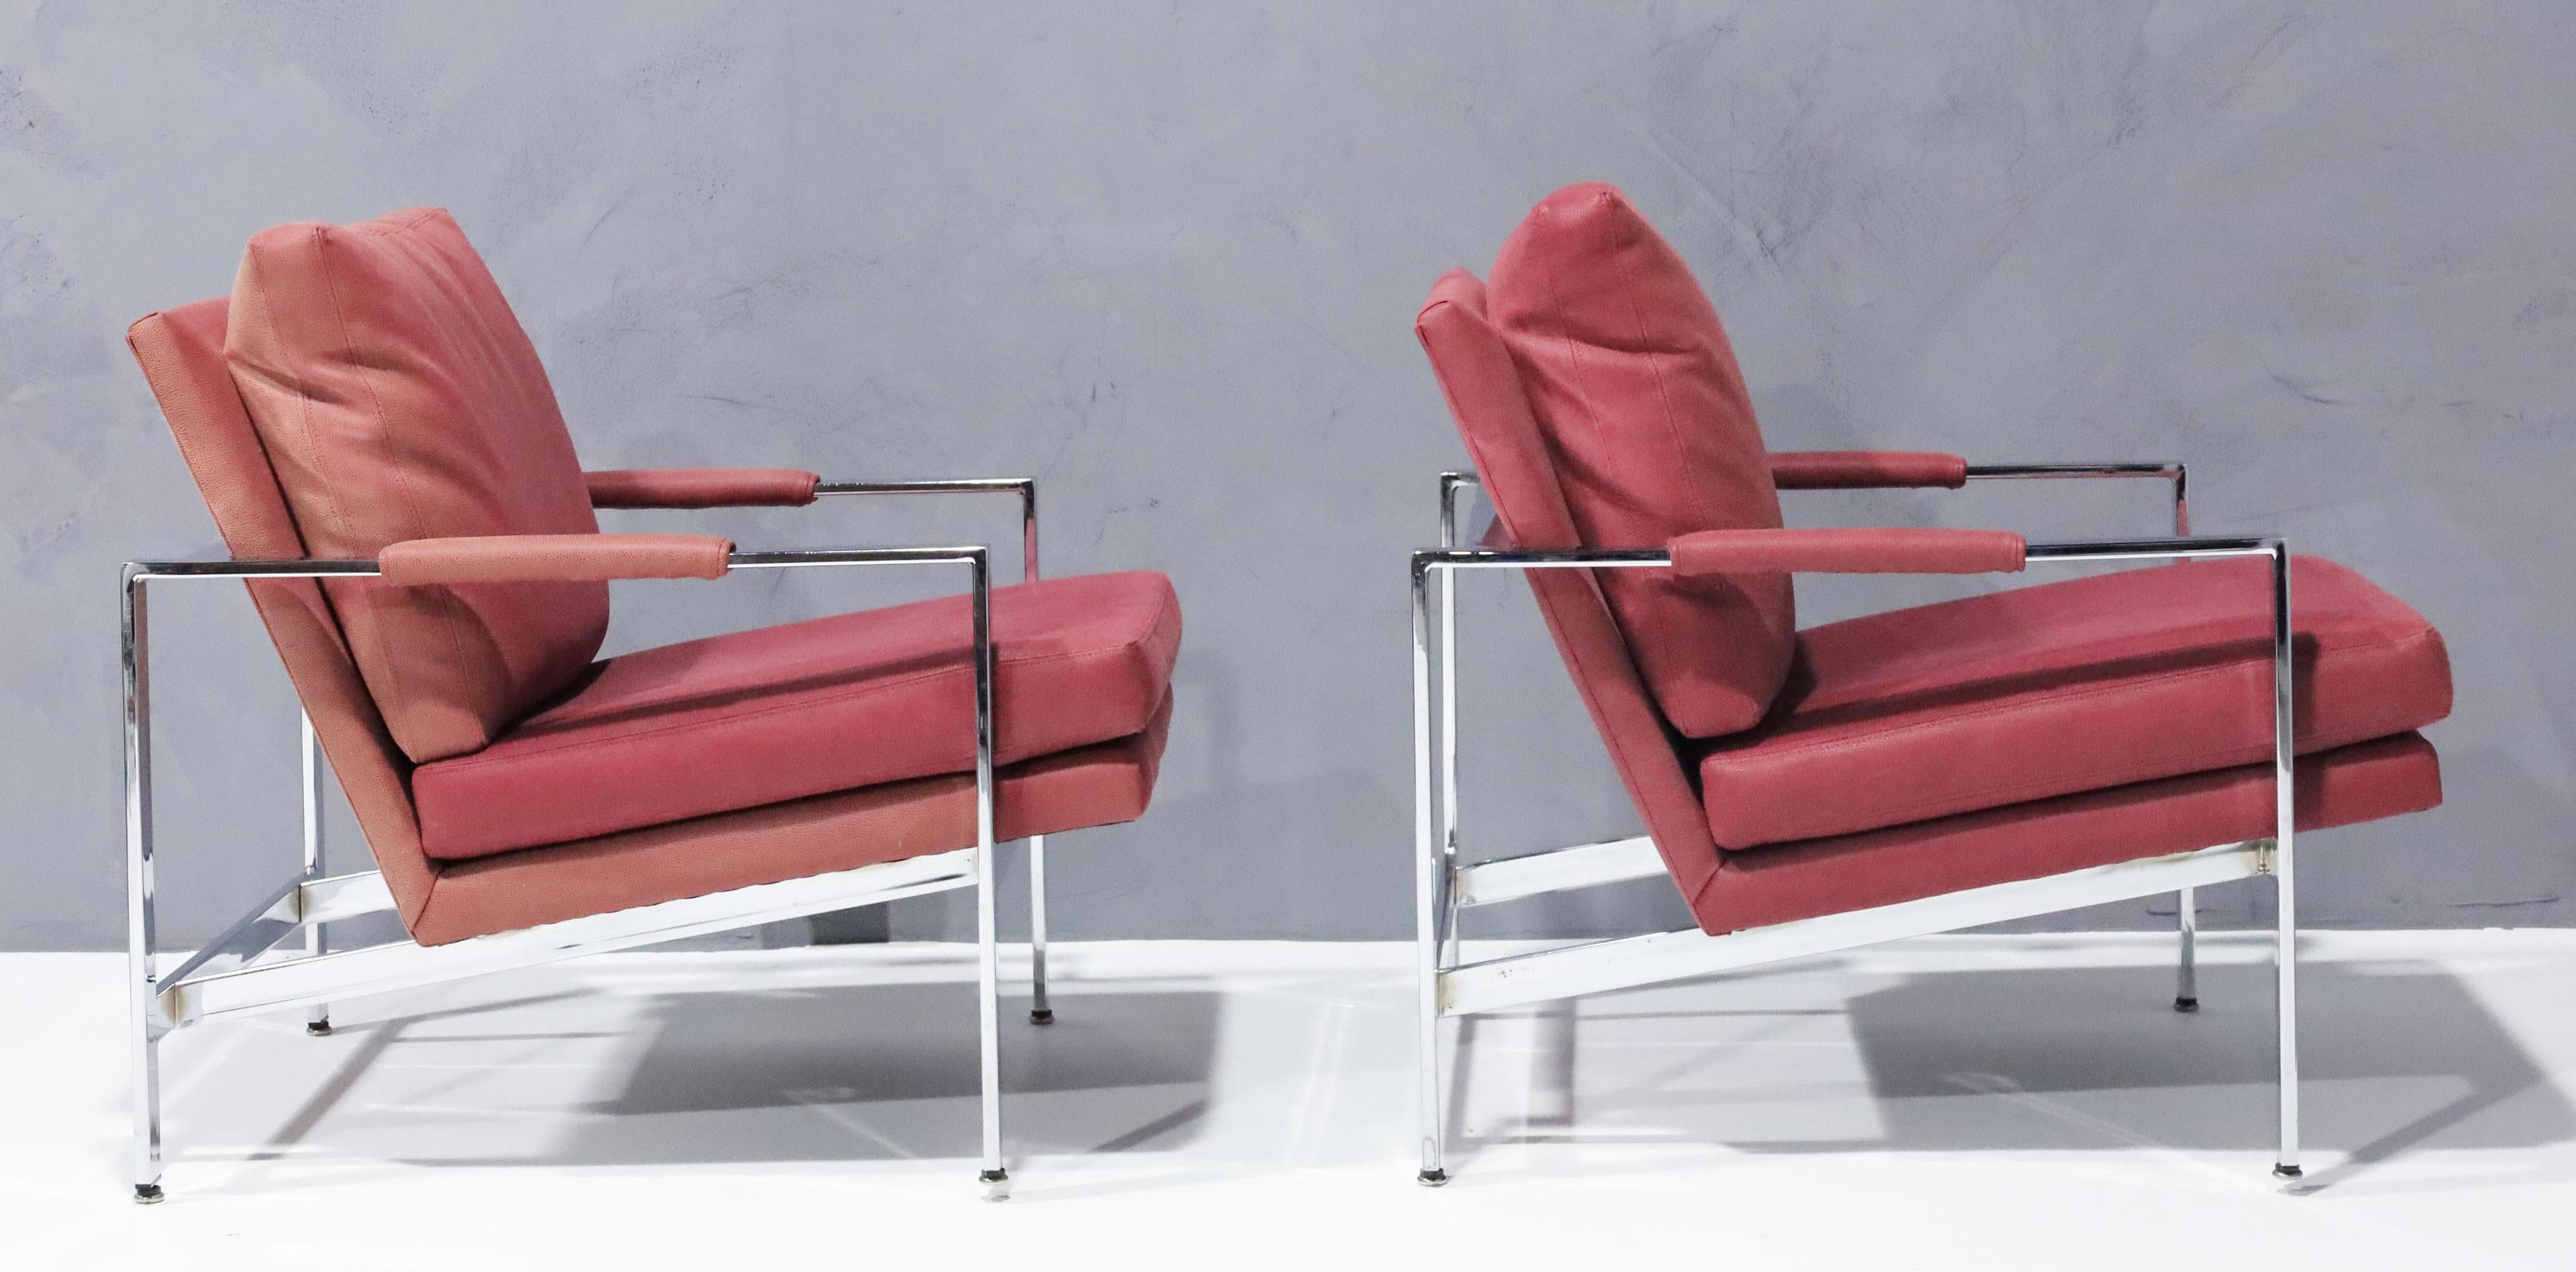 One of his timeless designs, a pair of chrome frame lounge chairs in a dusty rose faux suede/leather. The colors are slightly uneven in the back due to sun fading.